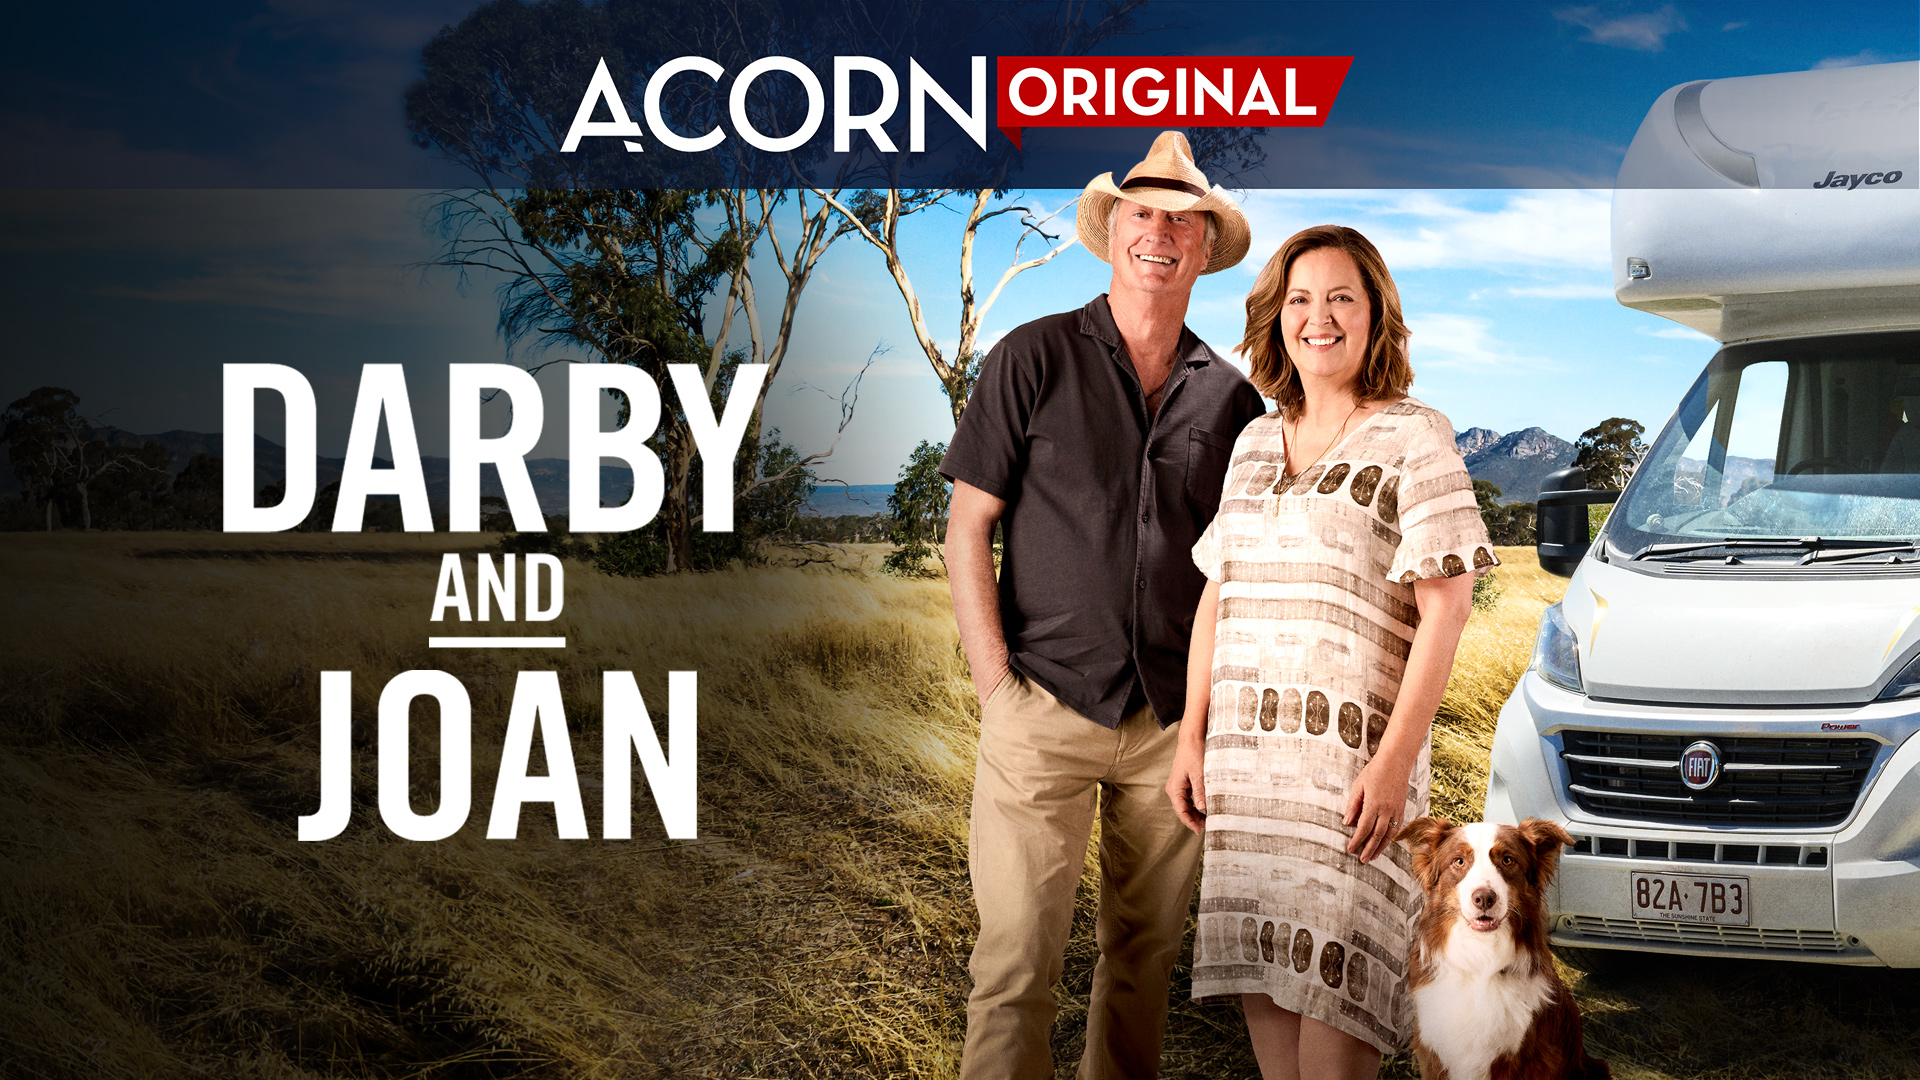 Darby and Joan starring Bryan Brown